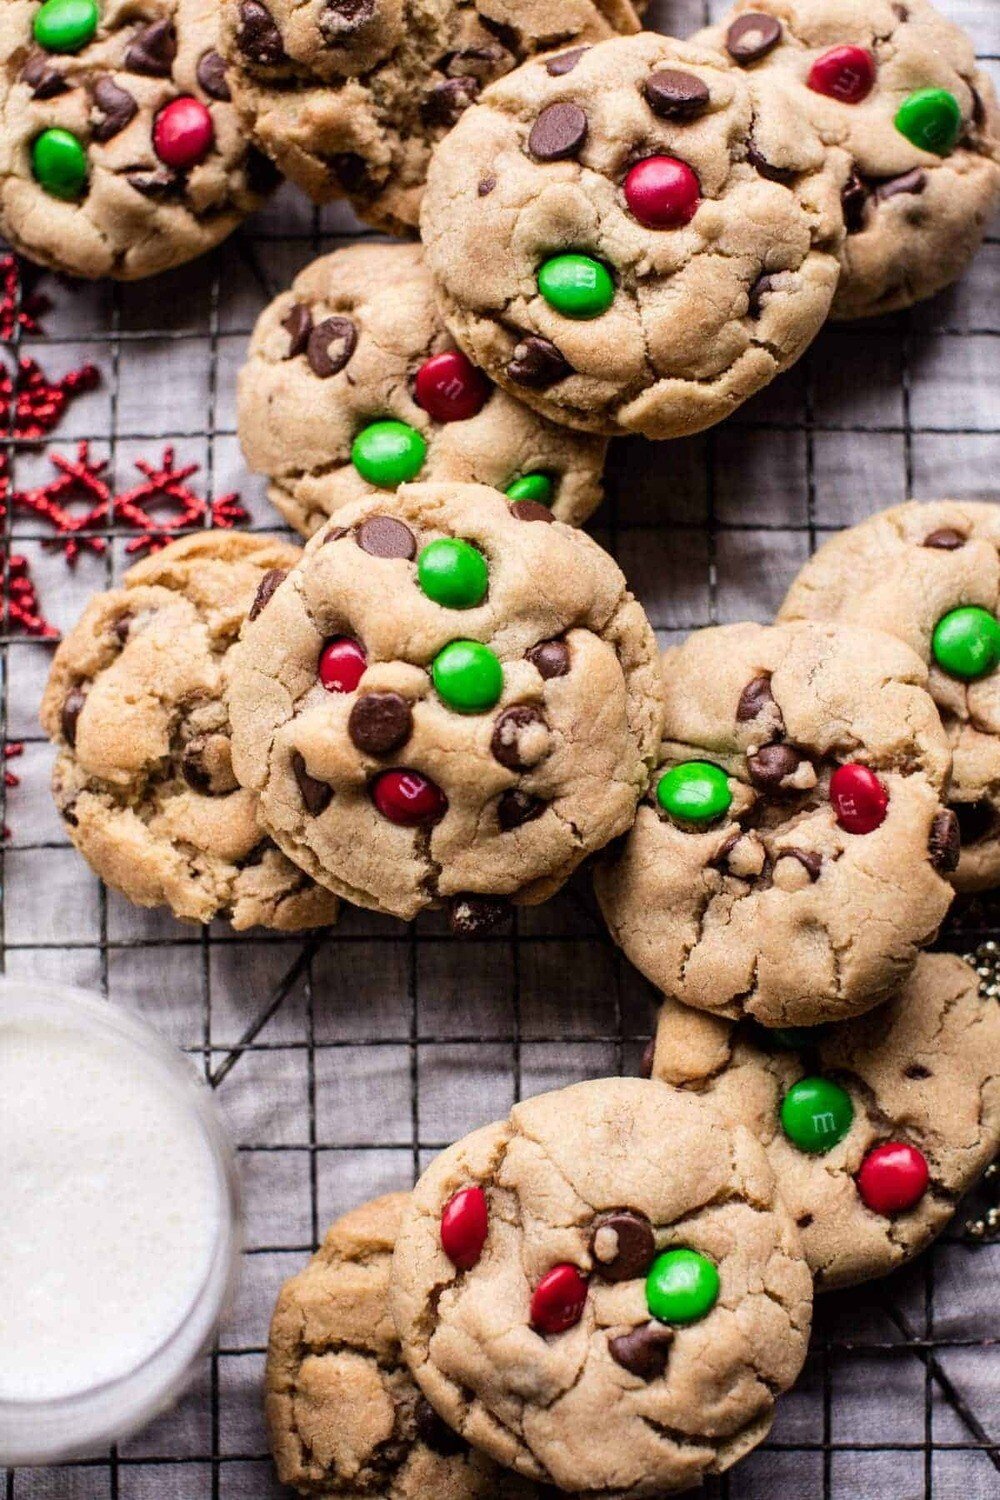 Chocochip cookies and M&Ms